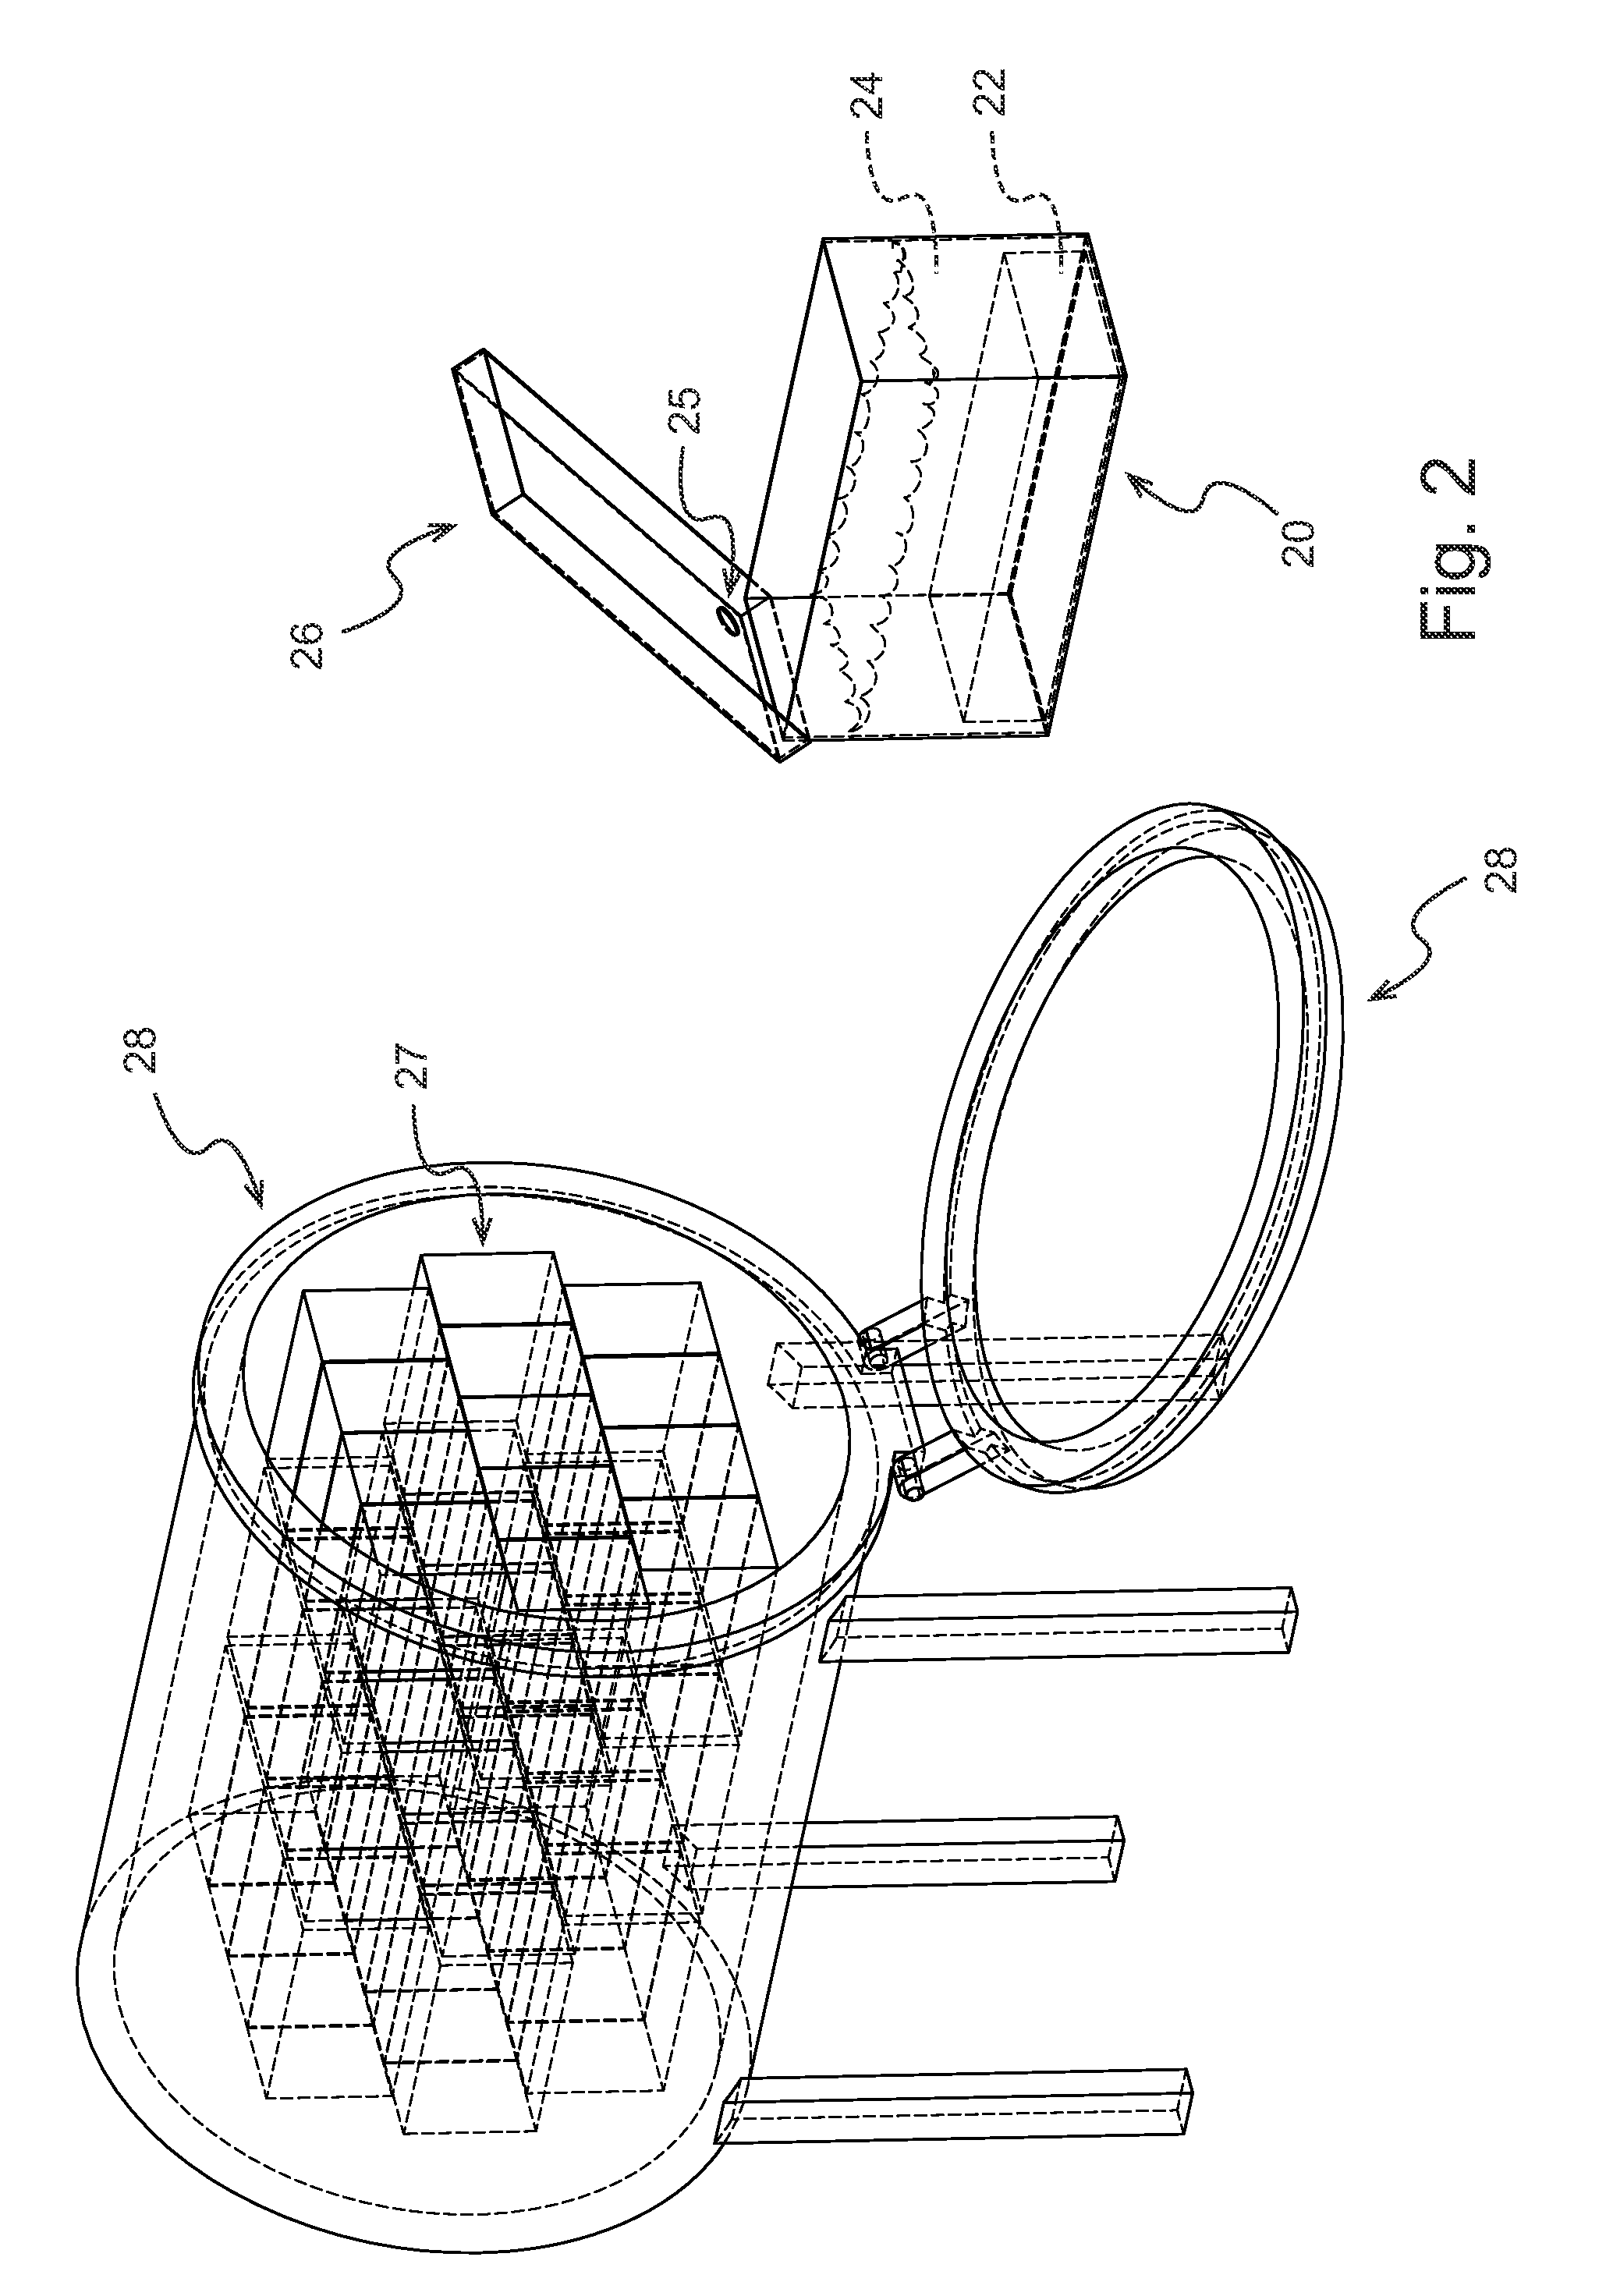 Composition and Method of Manufacture of Hardened Wood